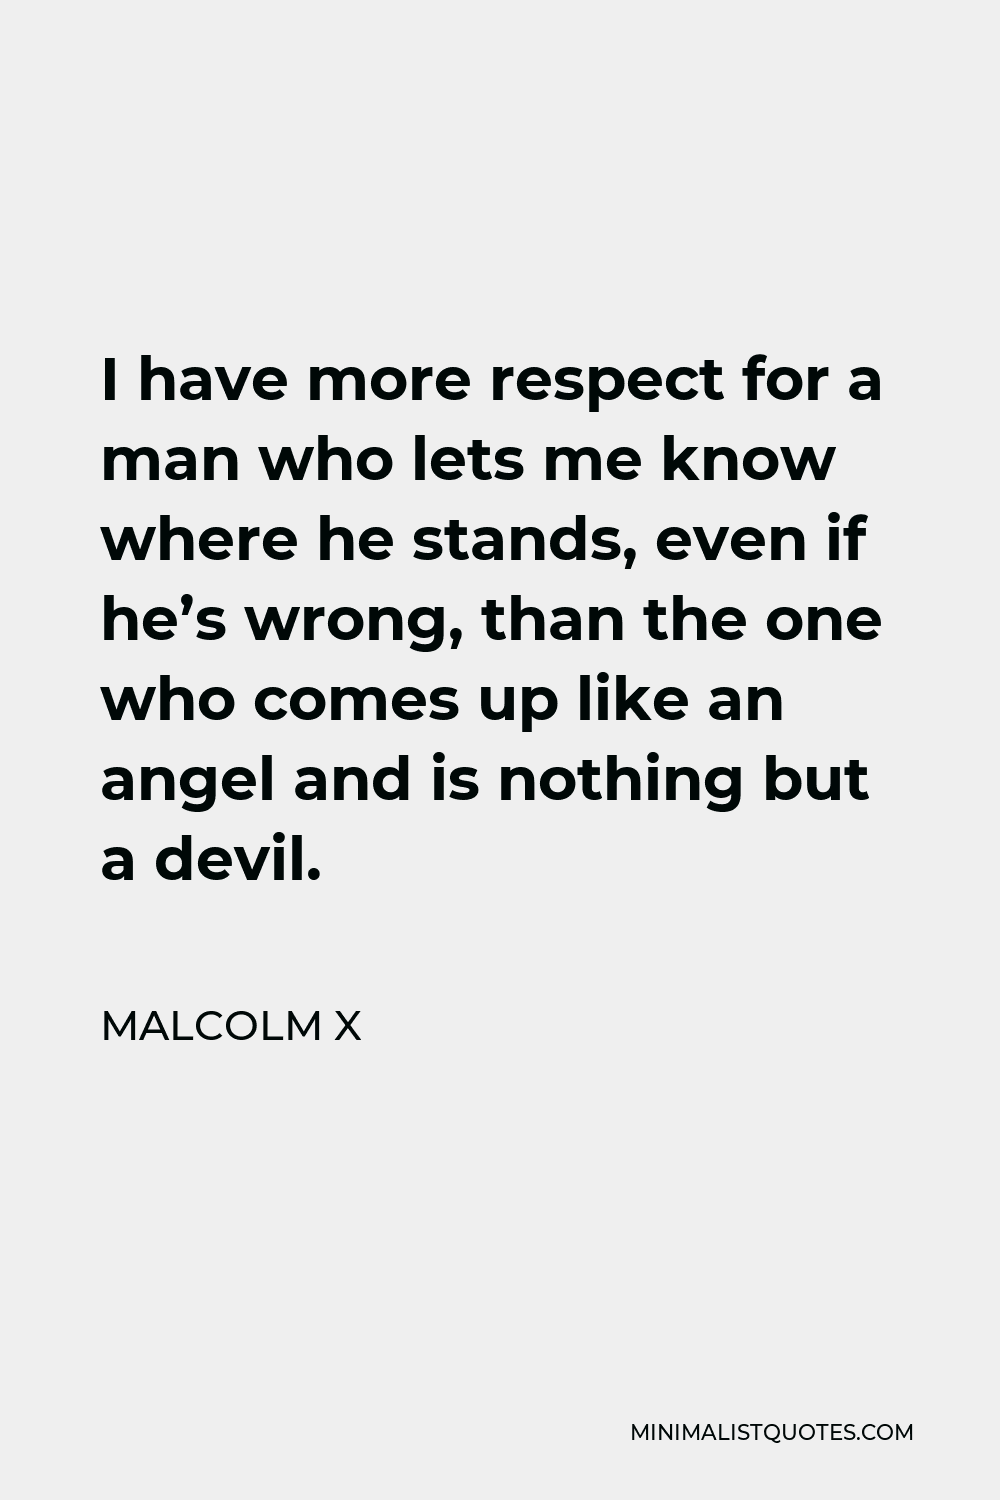 Malcolm X Quote - I have more respect for a man who lets me know where he stands, even if he’s wrong, than the one who comes up like an angel and is nothing but a devil.